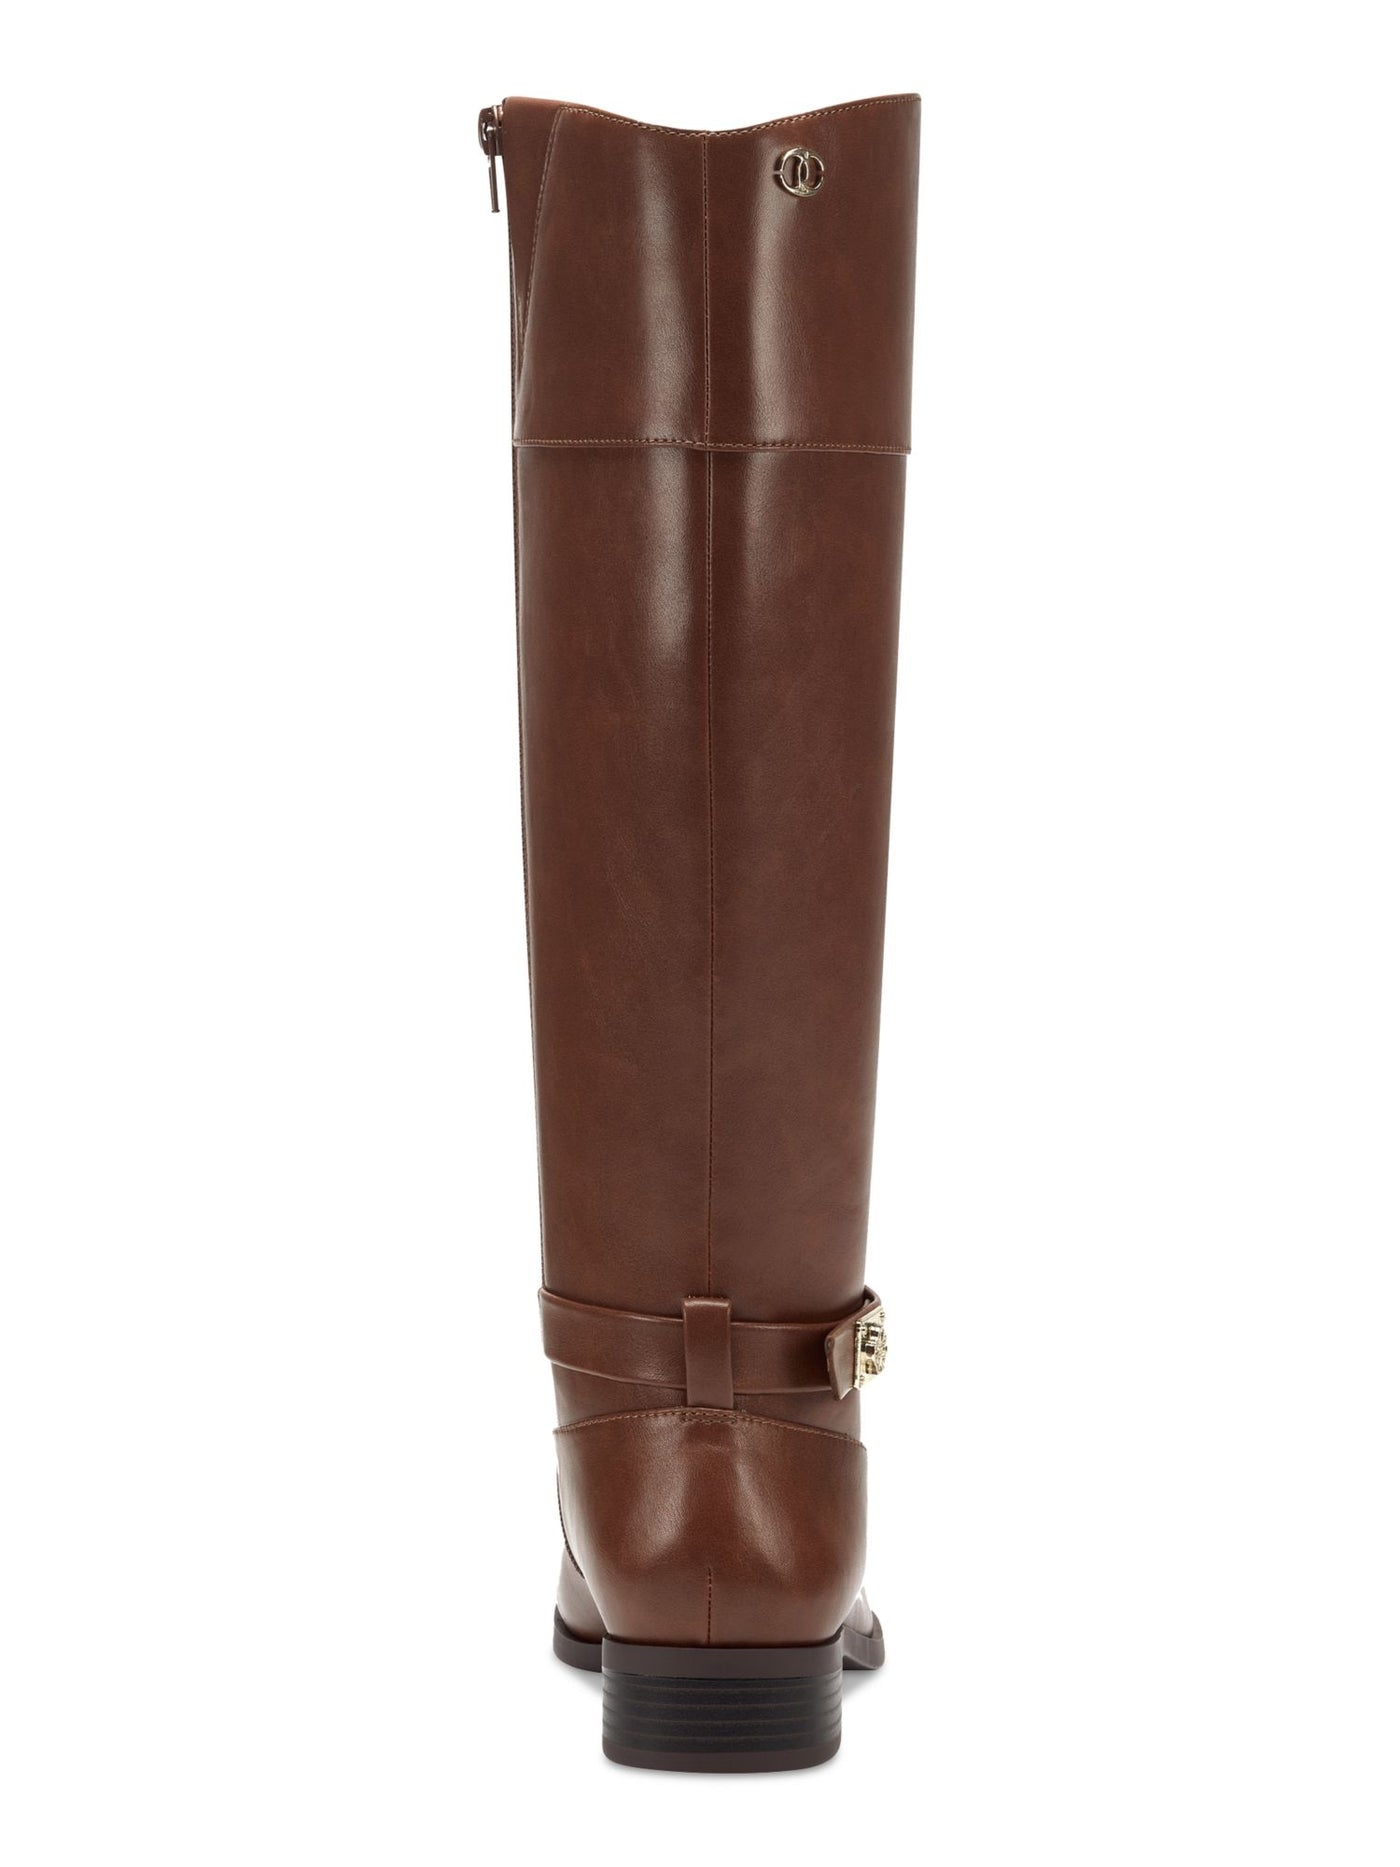 CHARTER CLUB Womens Brown Buckle Accent Johannes Round Toe Zip-Up Riding Boot 5.5 M